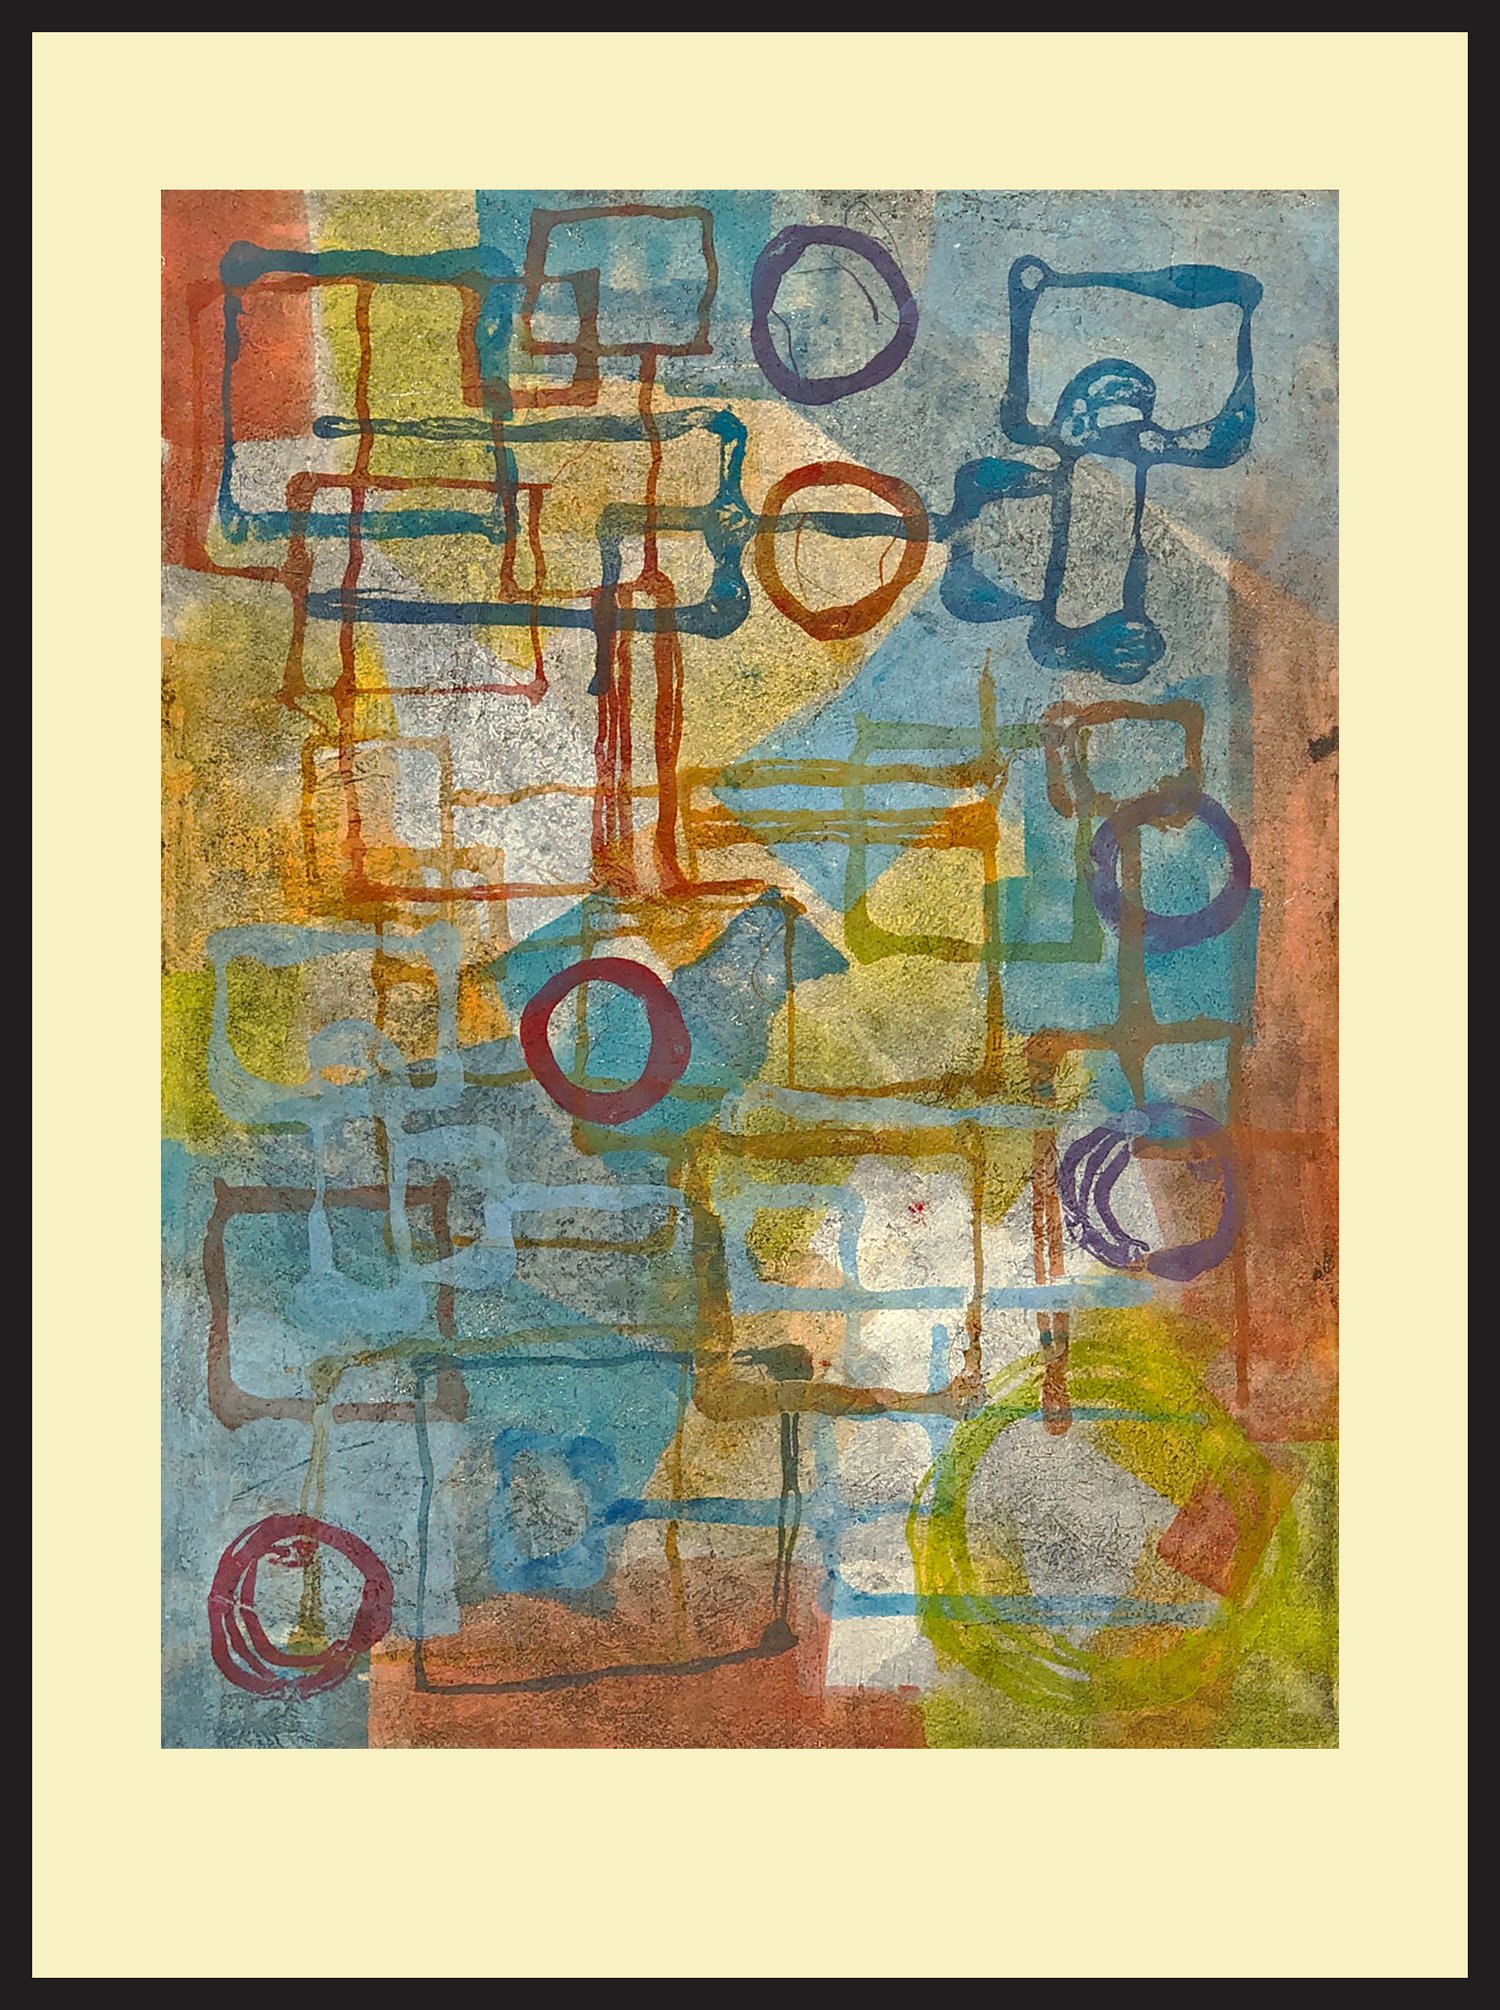    At Every Turn   there is a new opportunity for adventure or a new beginning. Life is a journey, not a destination.  Monoprint, custom mat and gray metal frame, 32.25 x 25.25,” 1/1  &nbsp; $945 - SOLD  